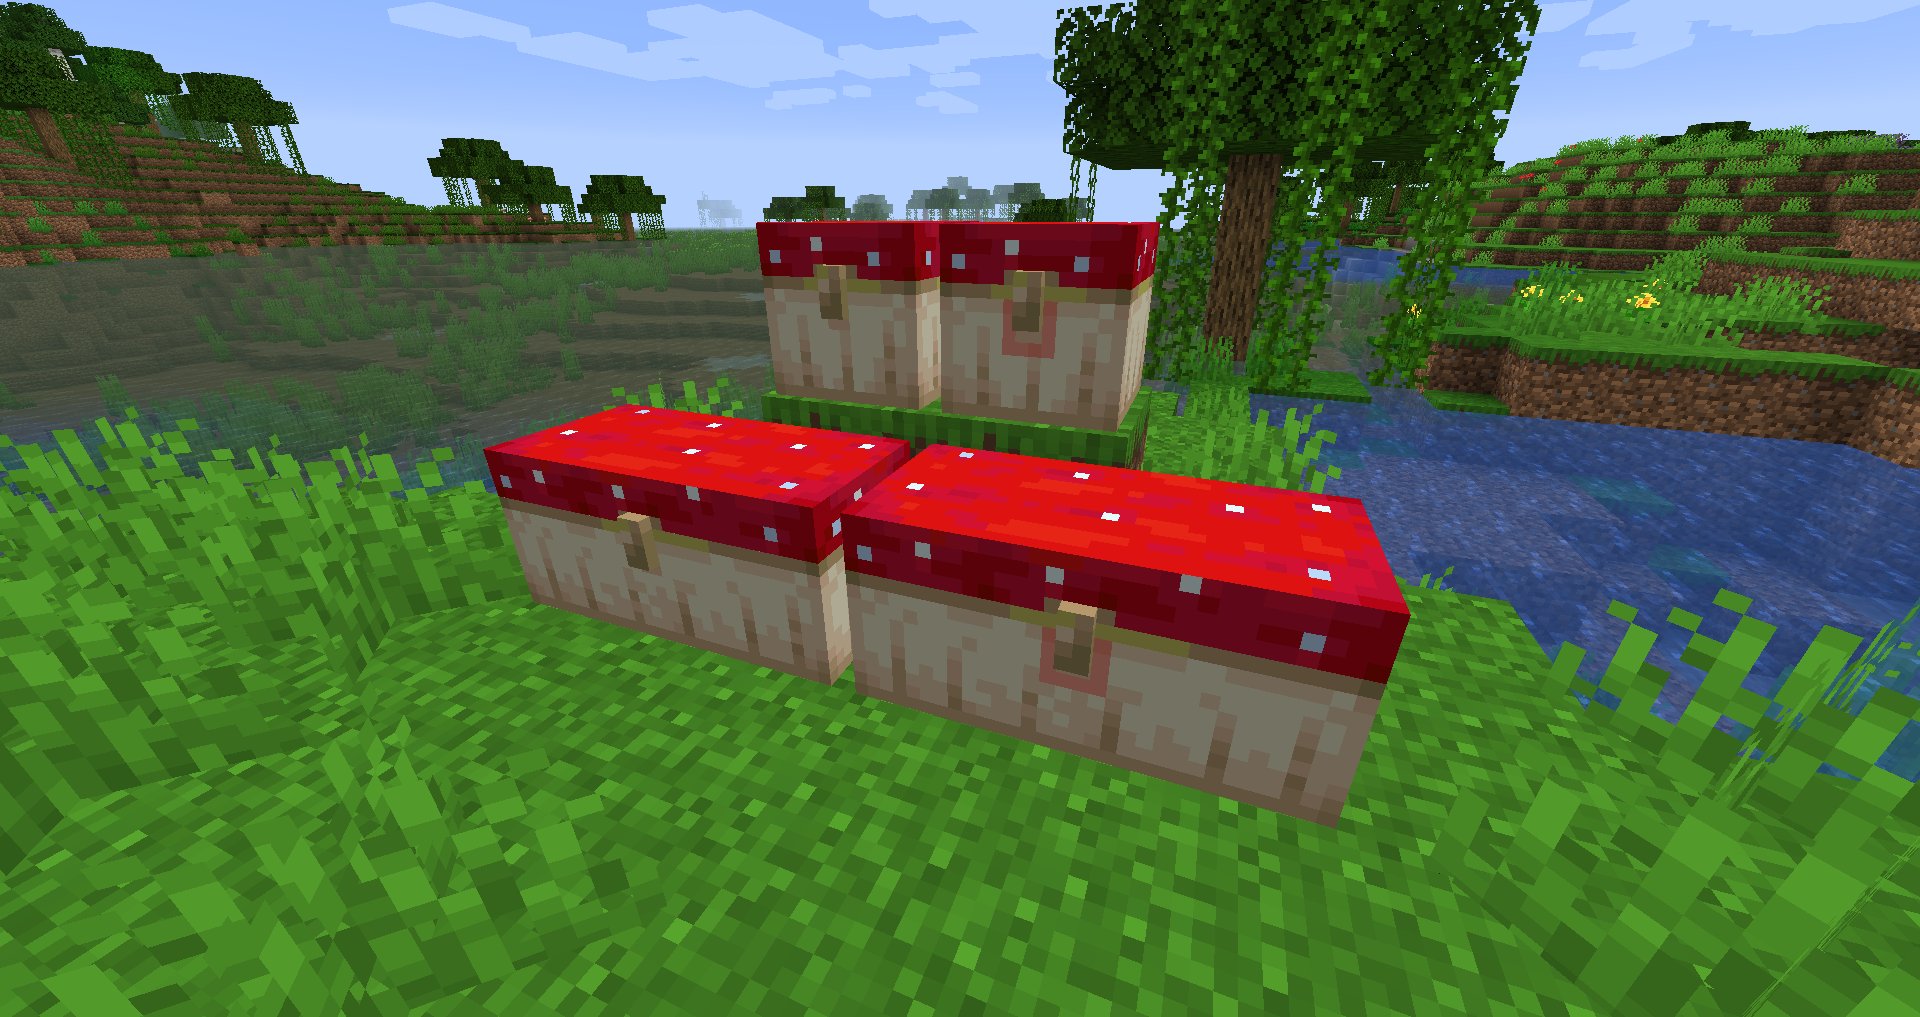 Vazkii S Mods Improved Quark Feature By Popular Request Variant Chests Now Gets A New Mushroom Chest